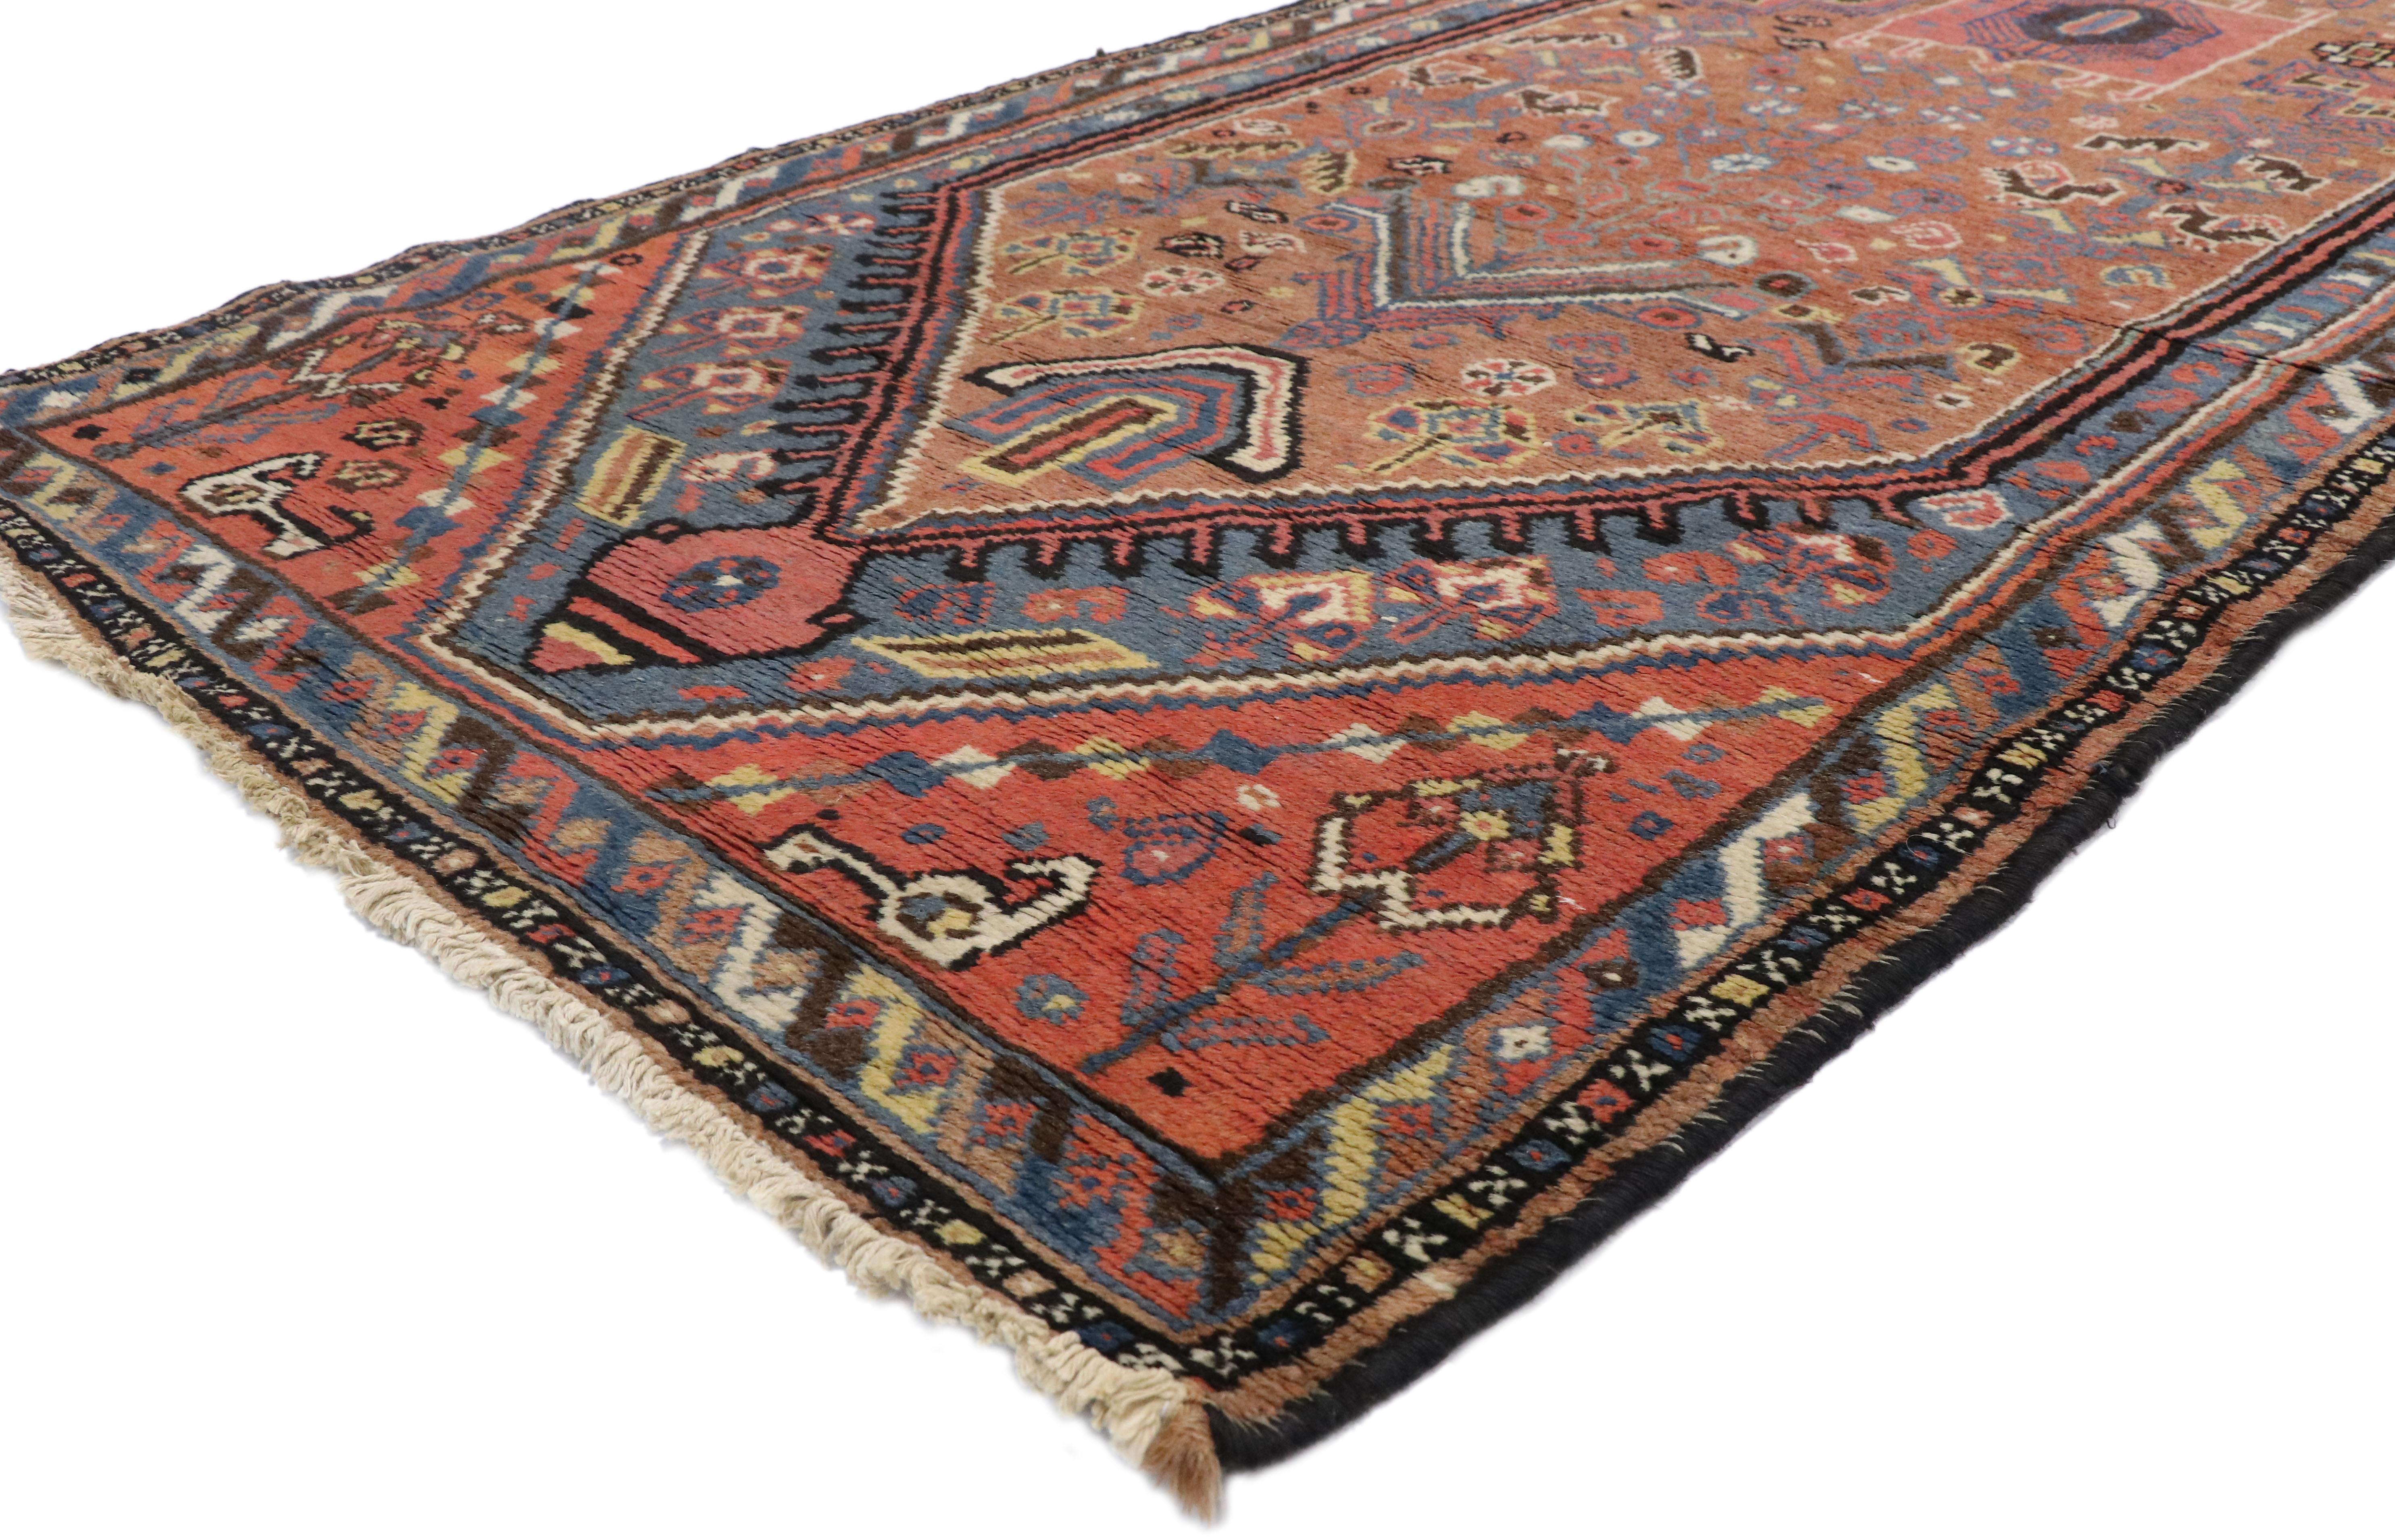 Antique Malayer Persian Runner with Mid-Century Modern Tribal Style 3